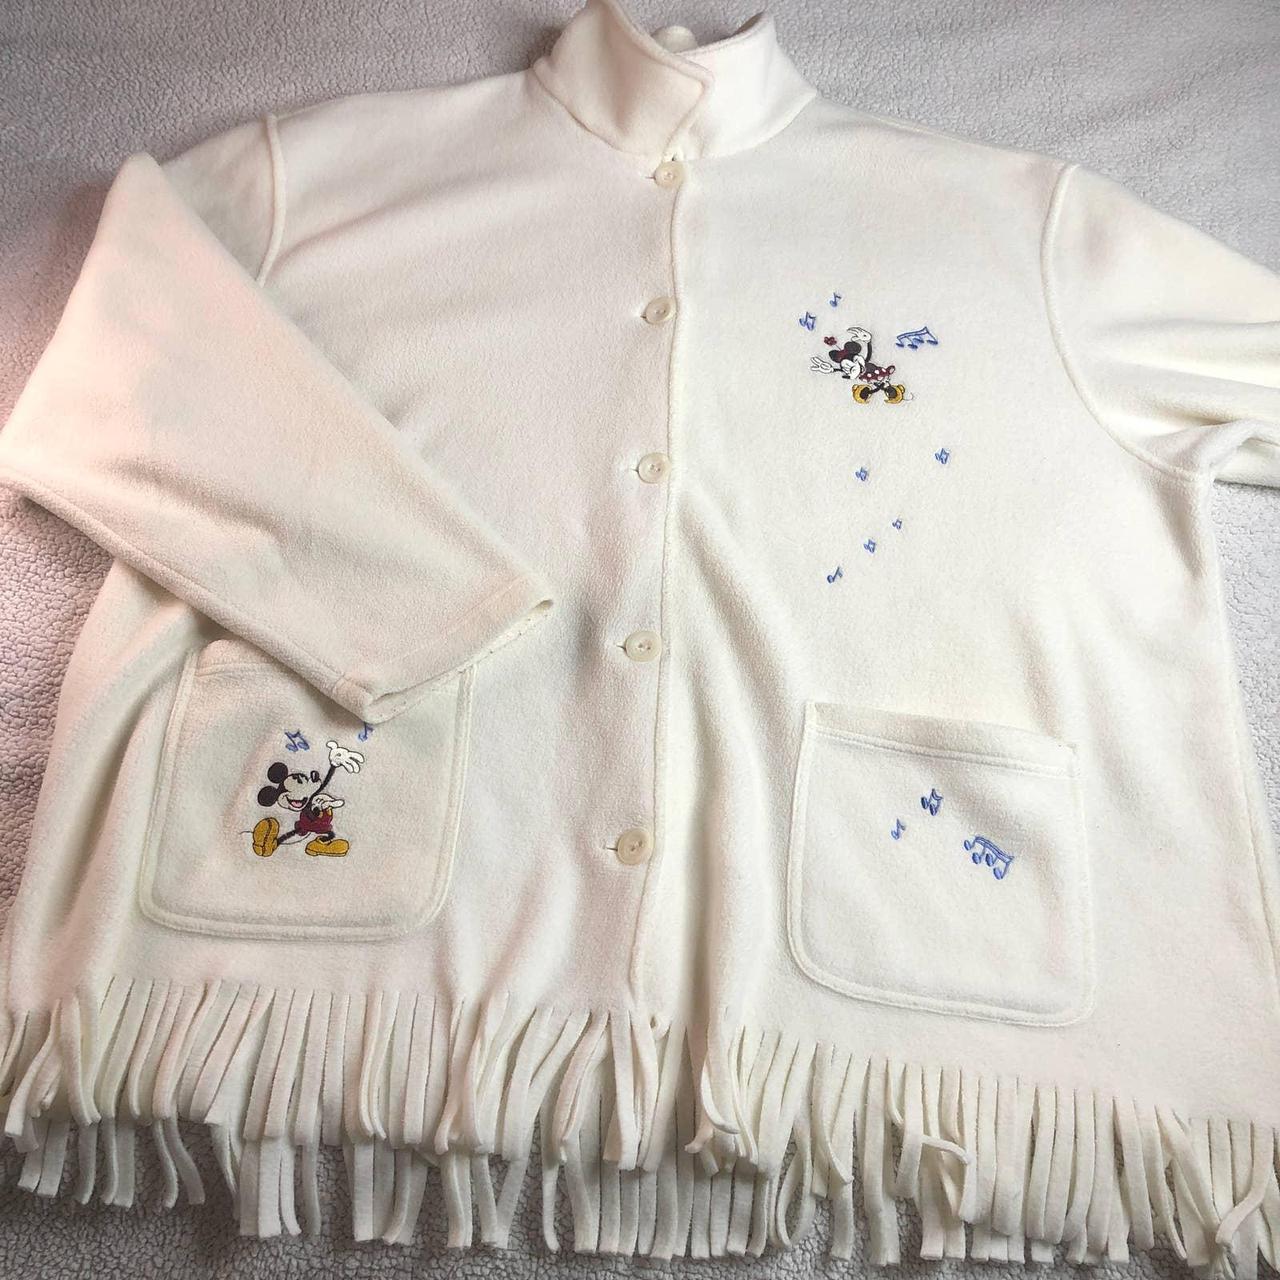 Product Image 1 - DETAIL: white/cream fleece button up